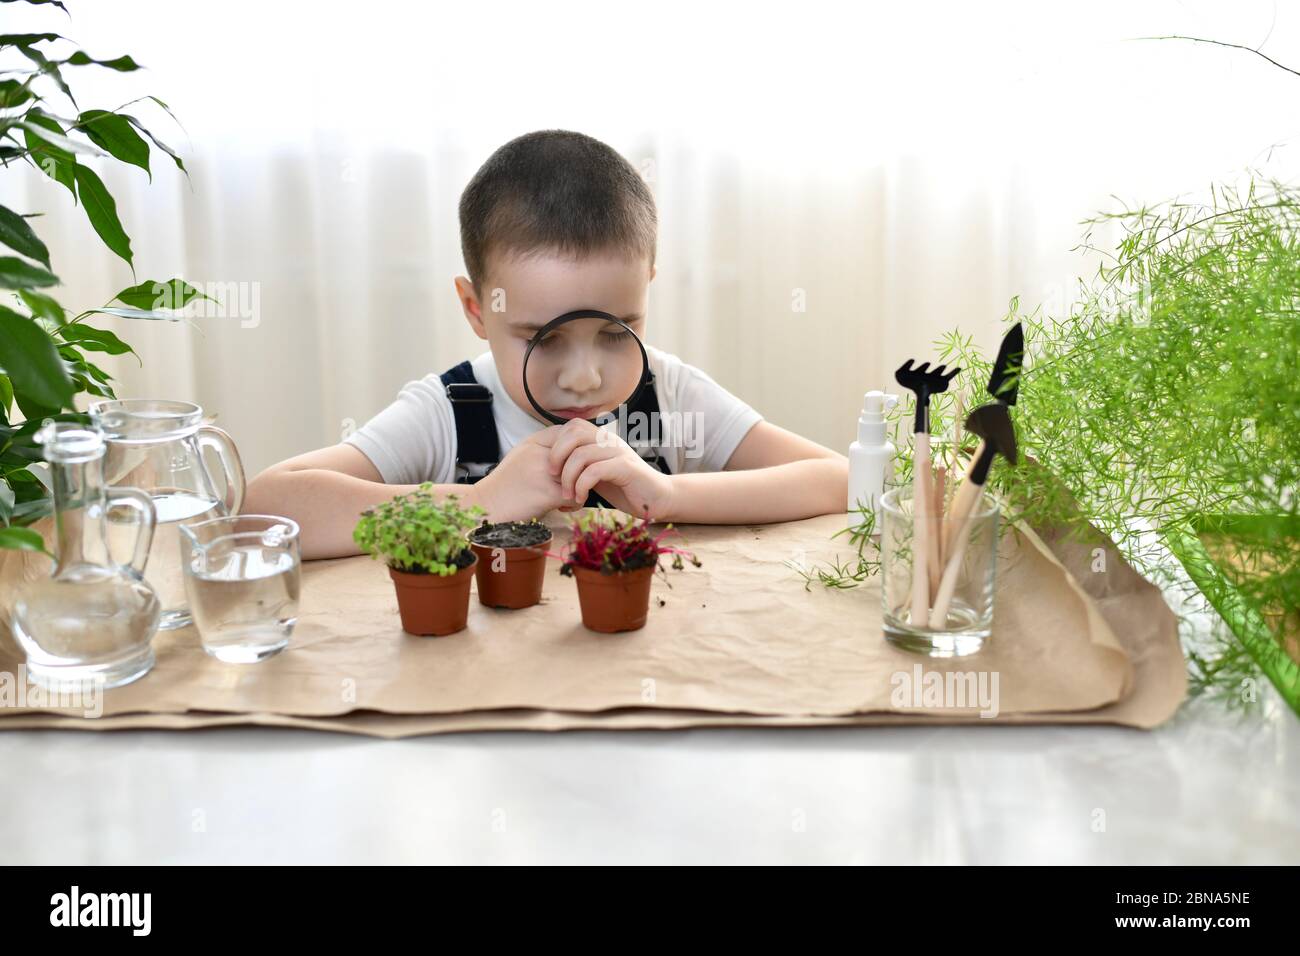 The child sits with a magnifying glass in front of his face with his eyes closed in front of pot growing plants. Stock Photo